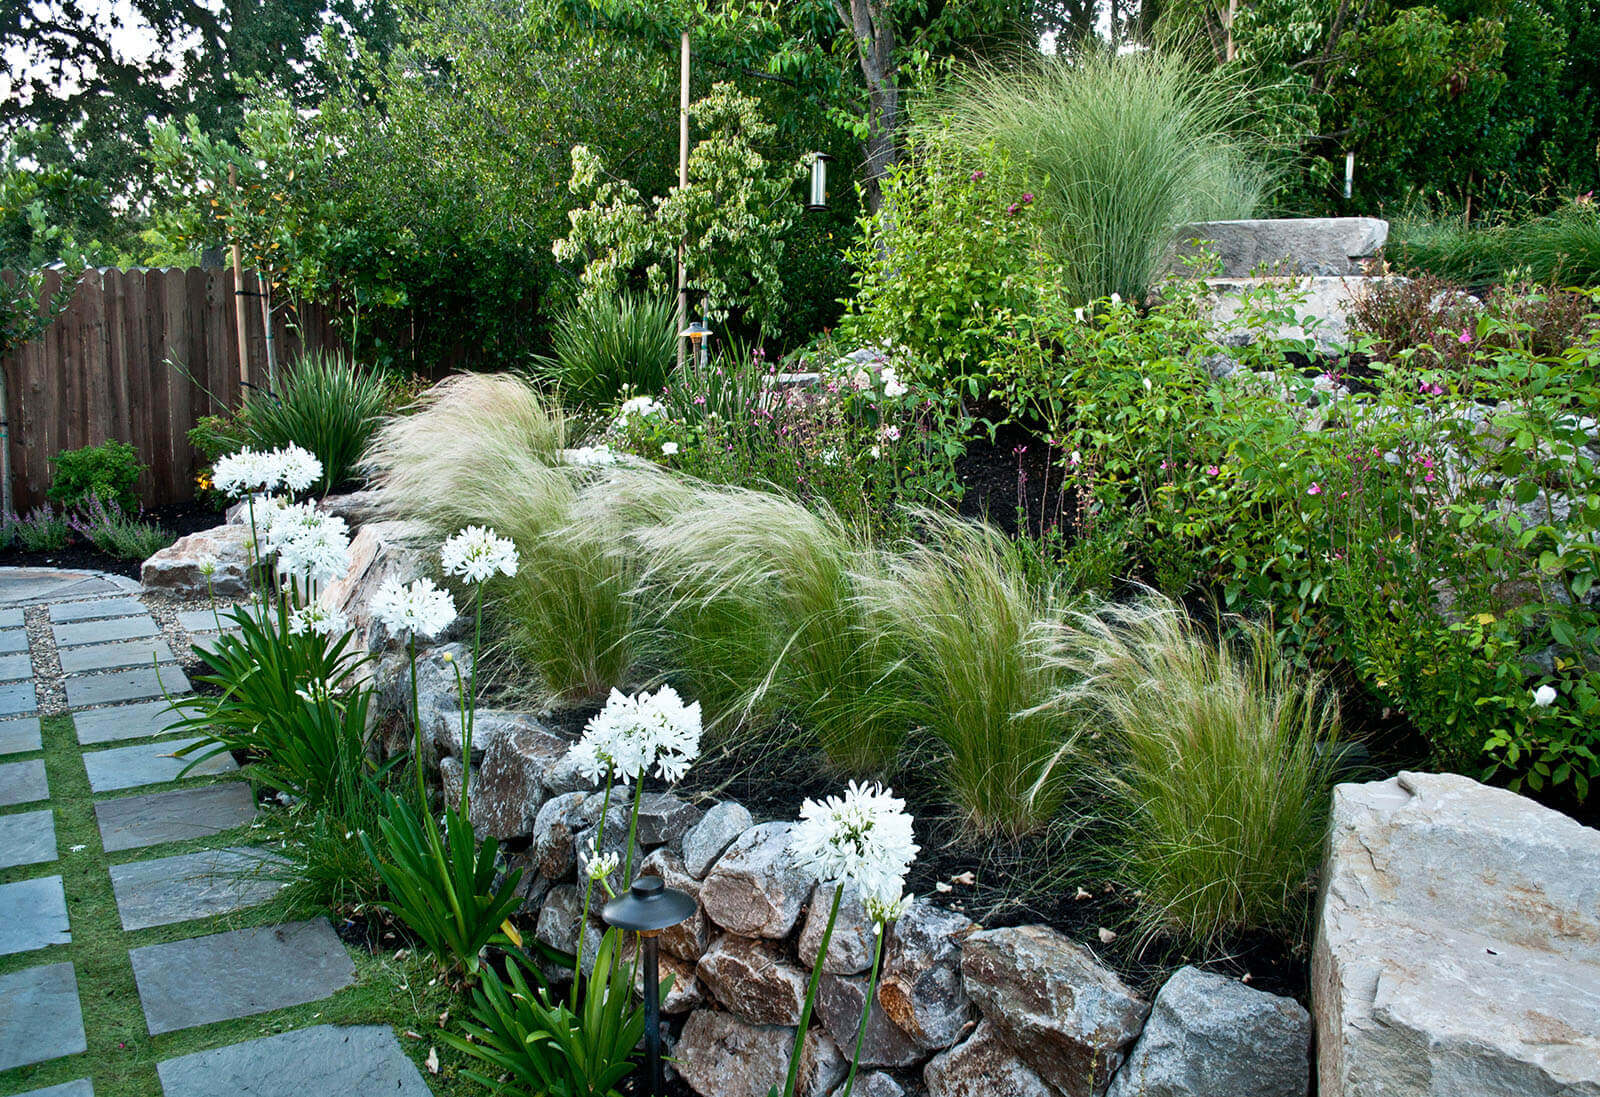 Medium and tall grasses mixed with bushes and white flowering plants in a staged rock wall garden